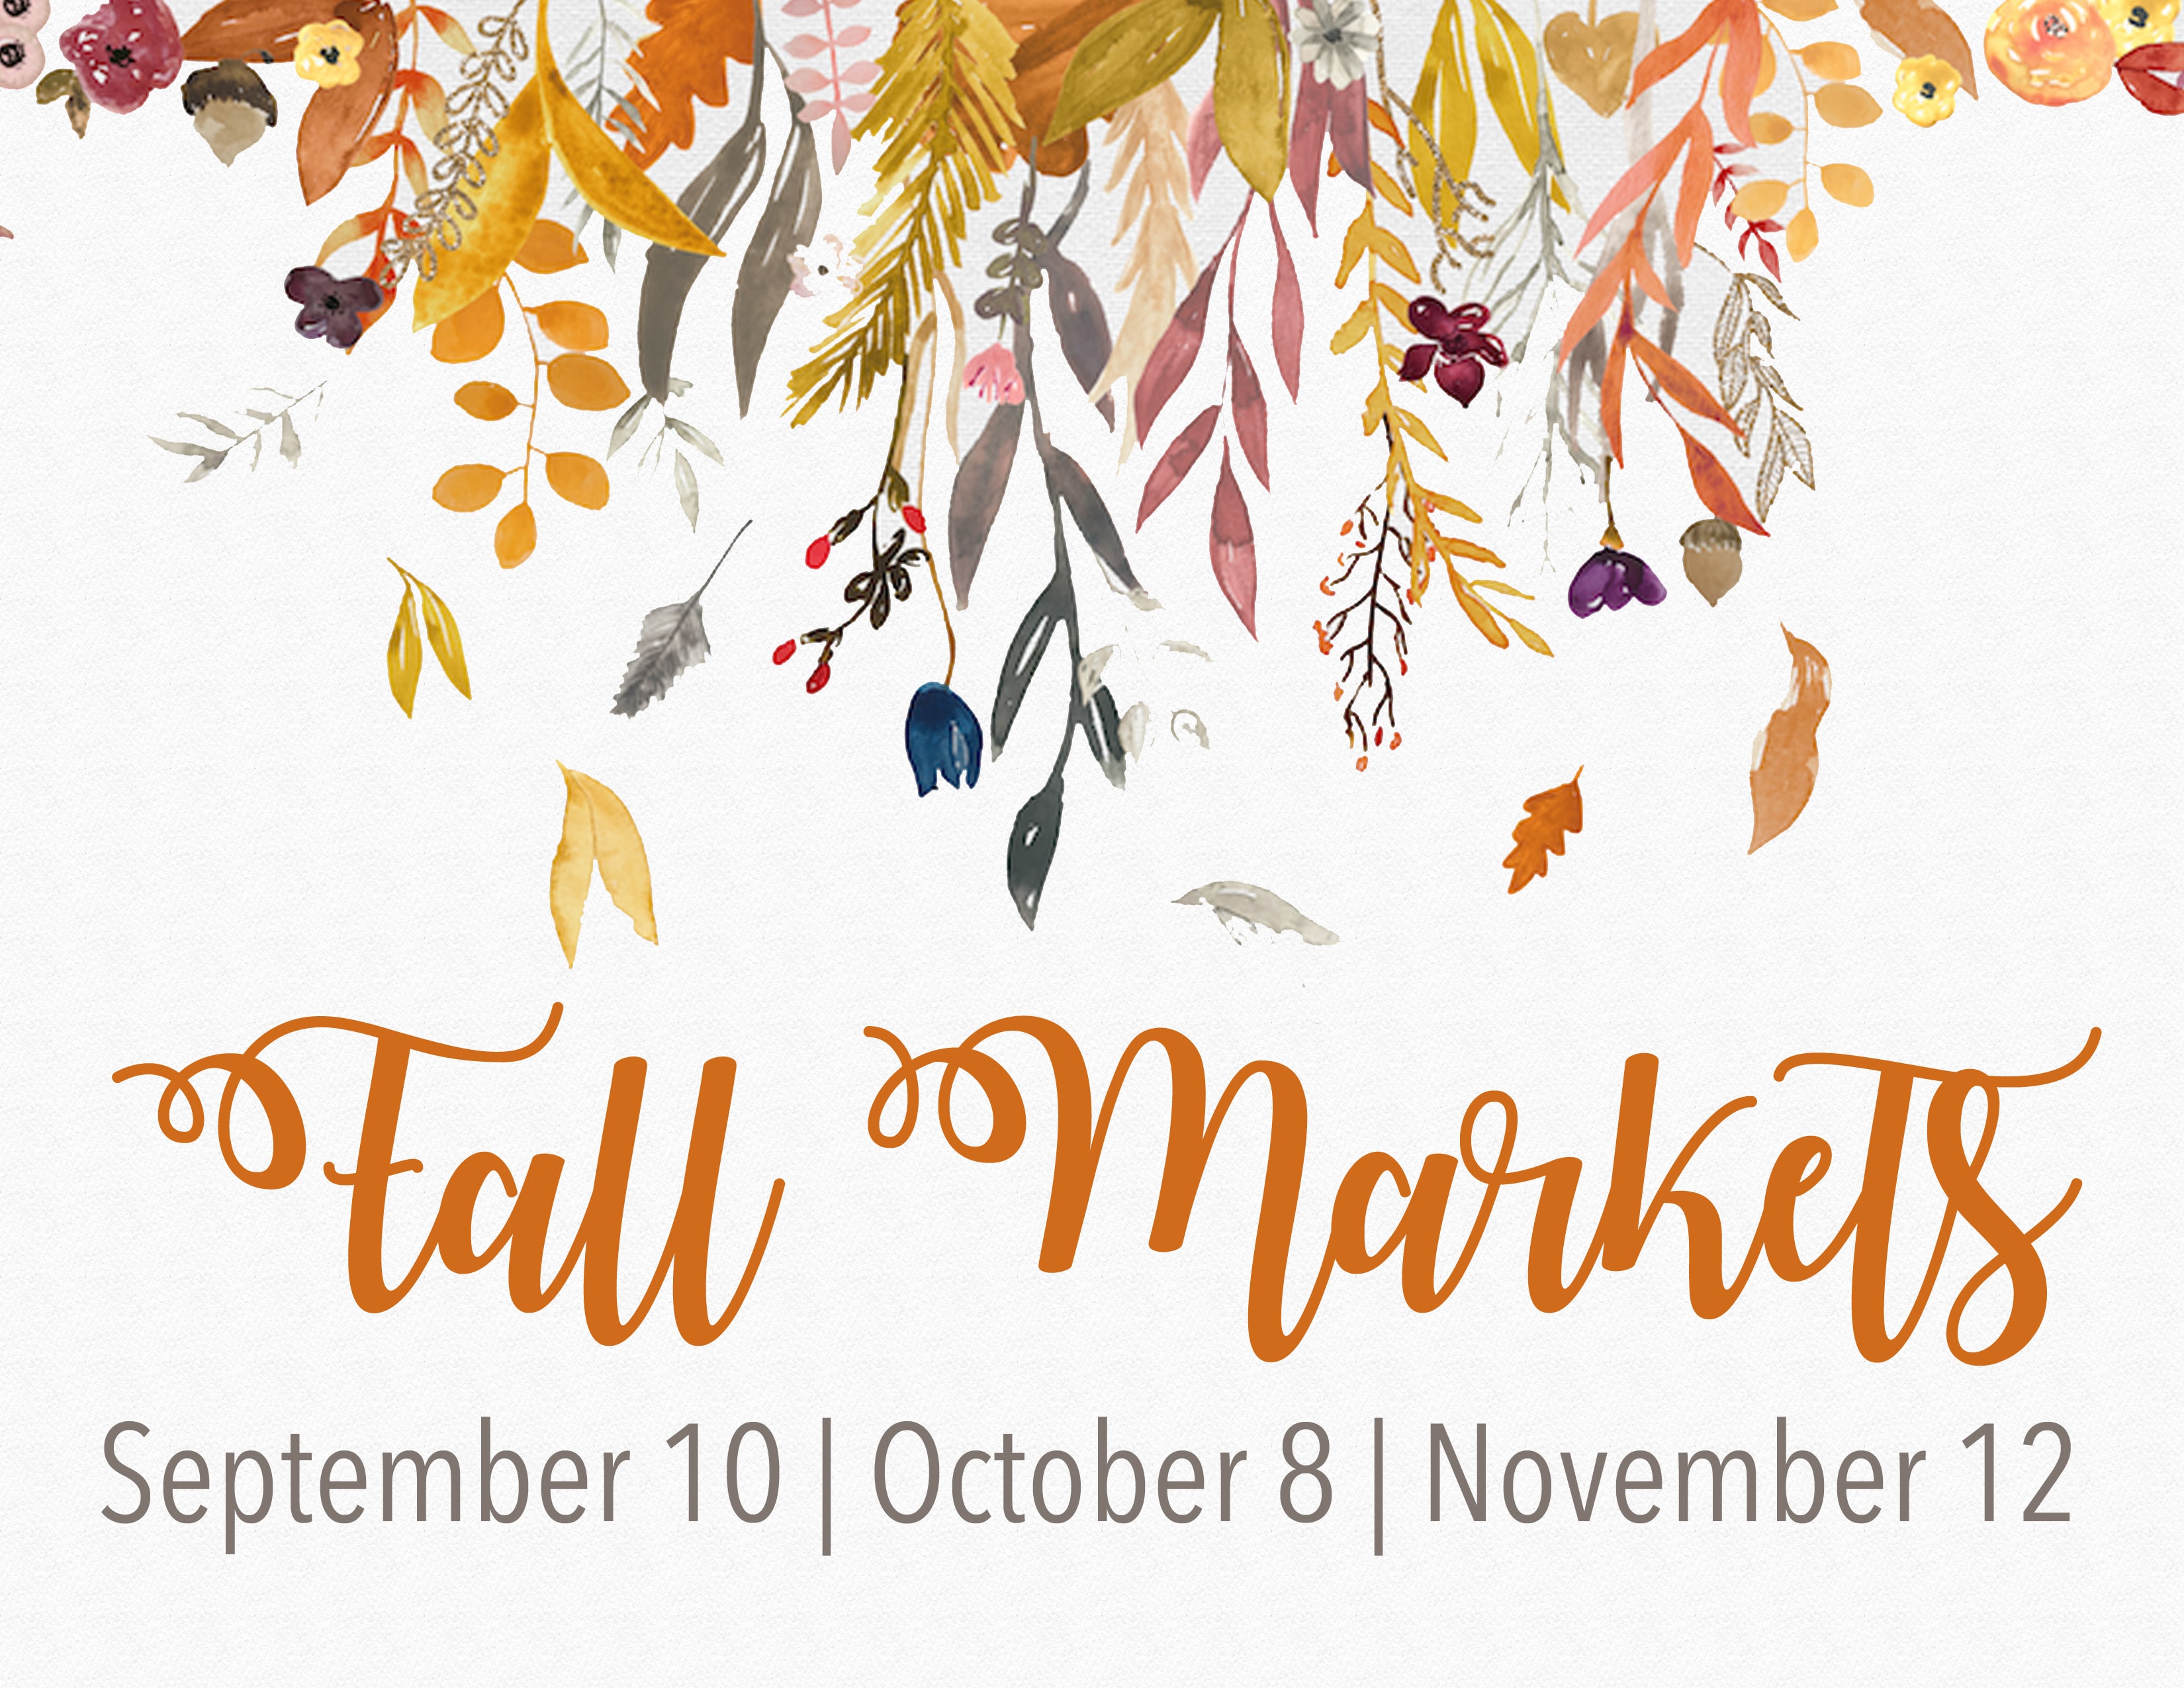 Fall Dates Announced! Events, Food, Music, Produce, Art, and More! |